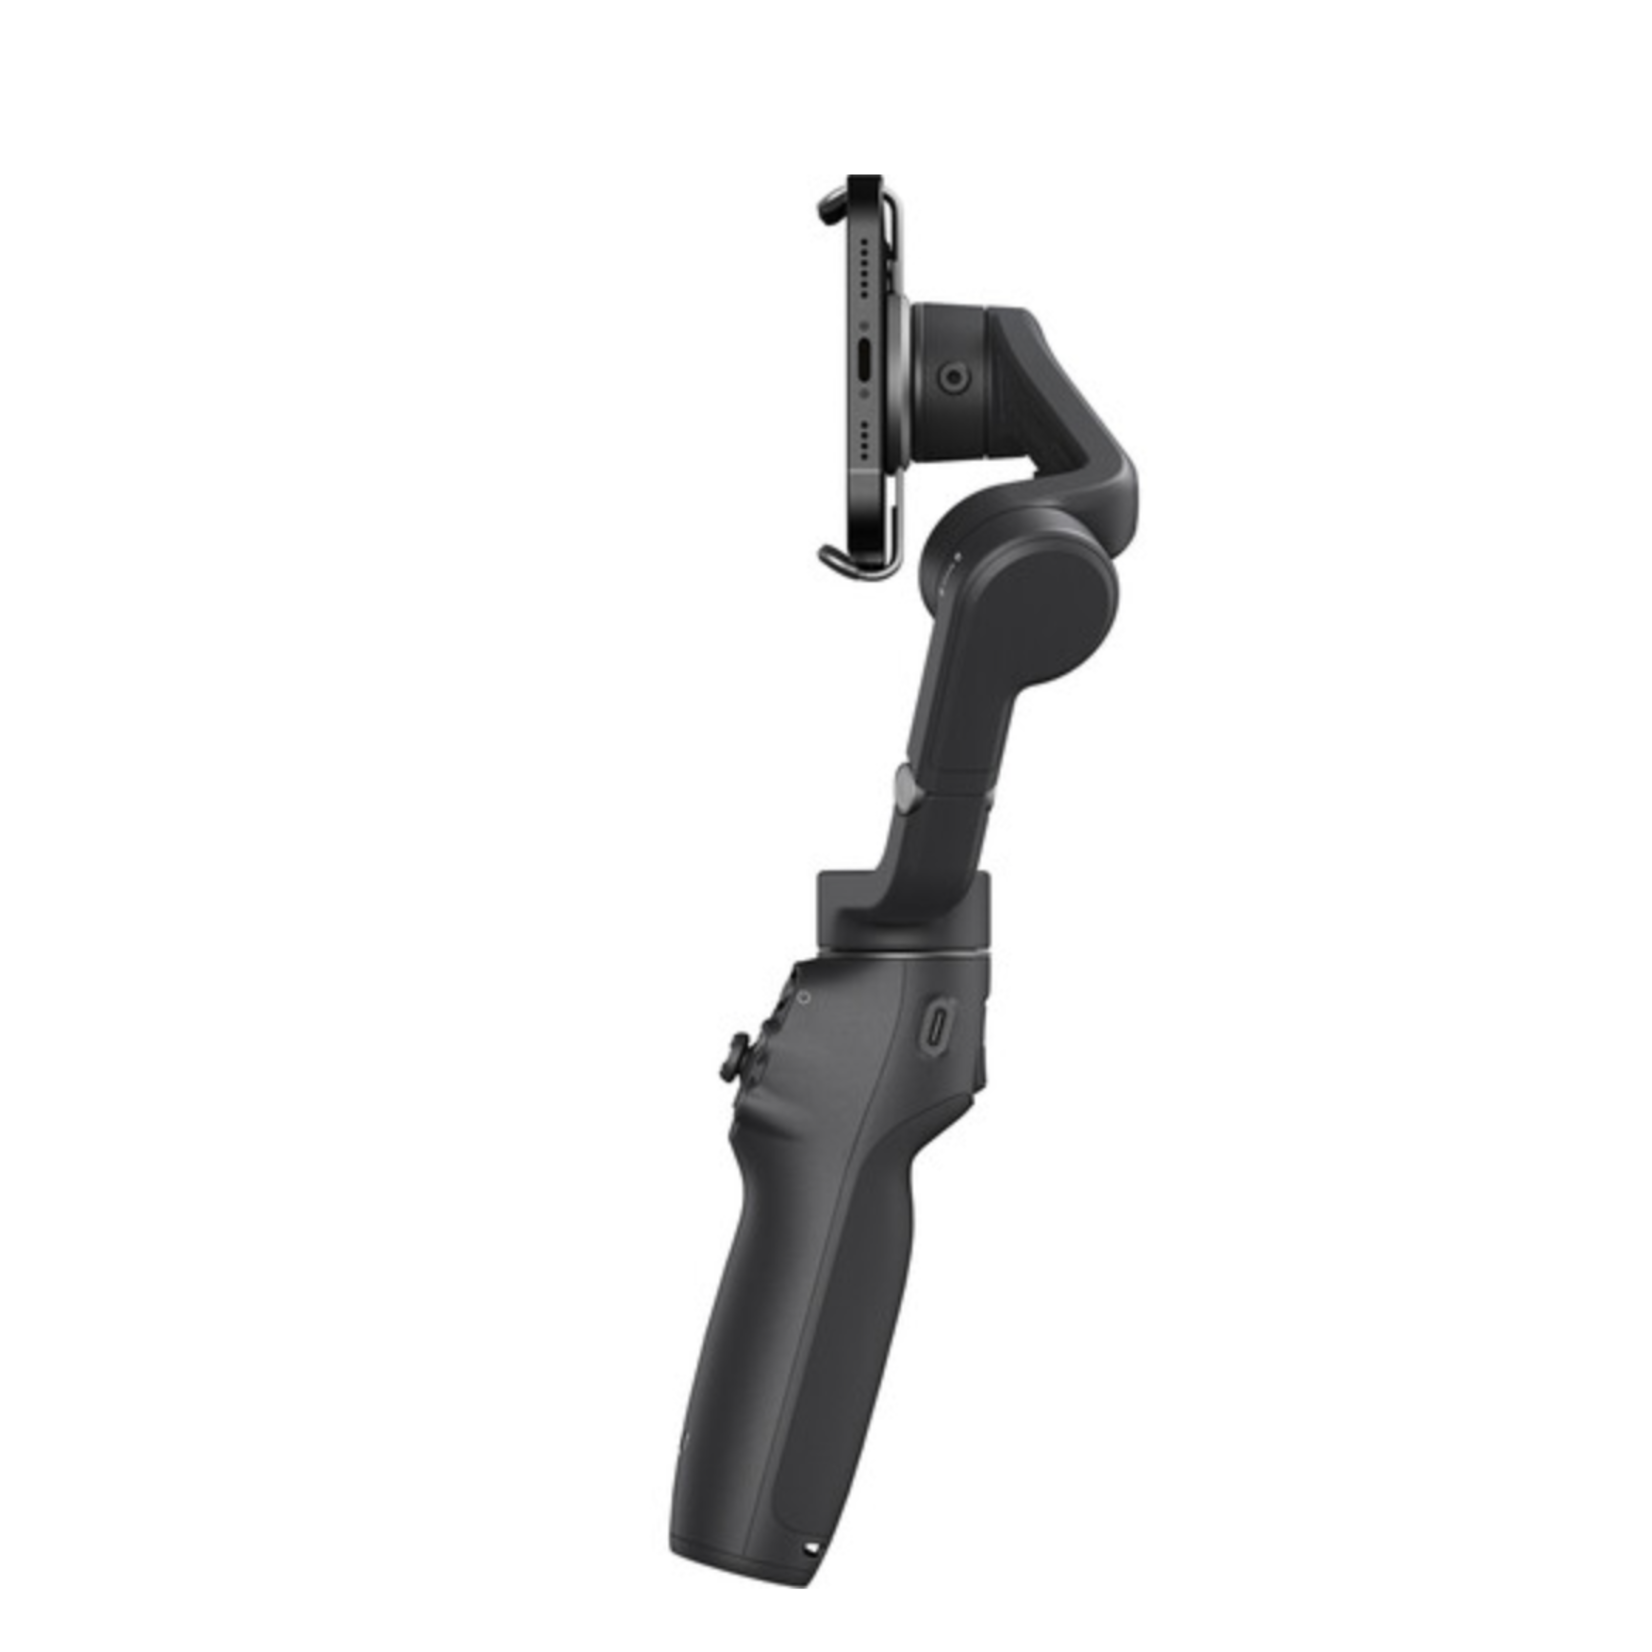 DJI Osmo Mobile 6 Review - A Great Smartphone Gimbal 